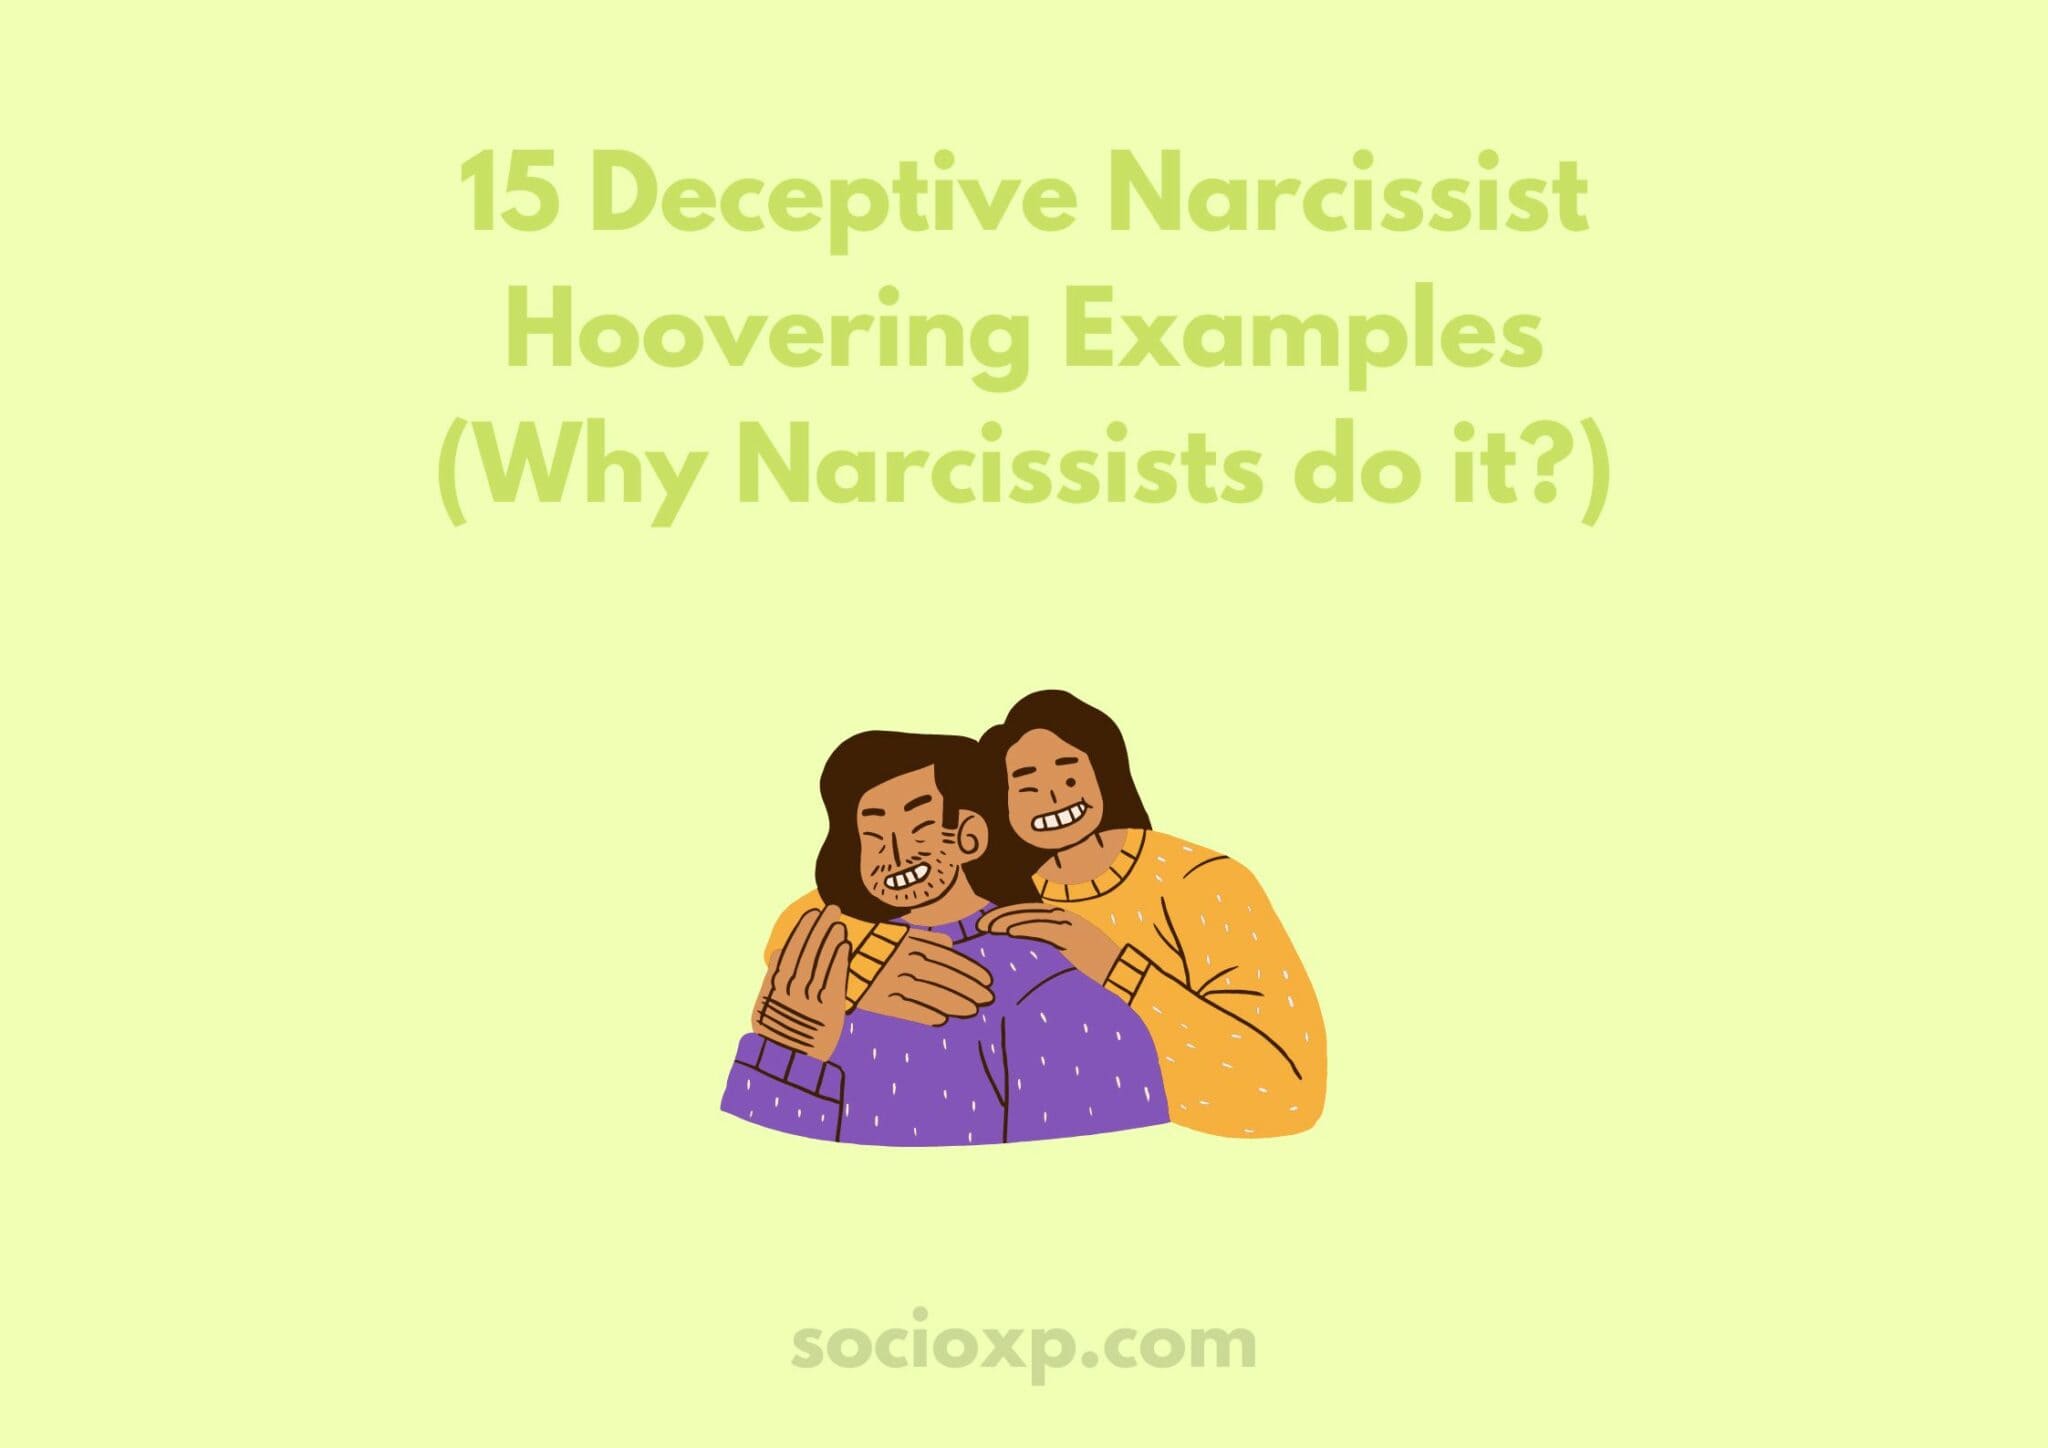 15 Deceptive Narcissist Hoovering Examples (Why Narcissists do it?)